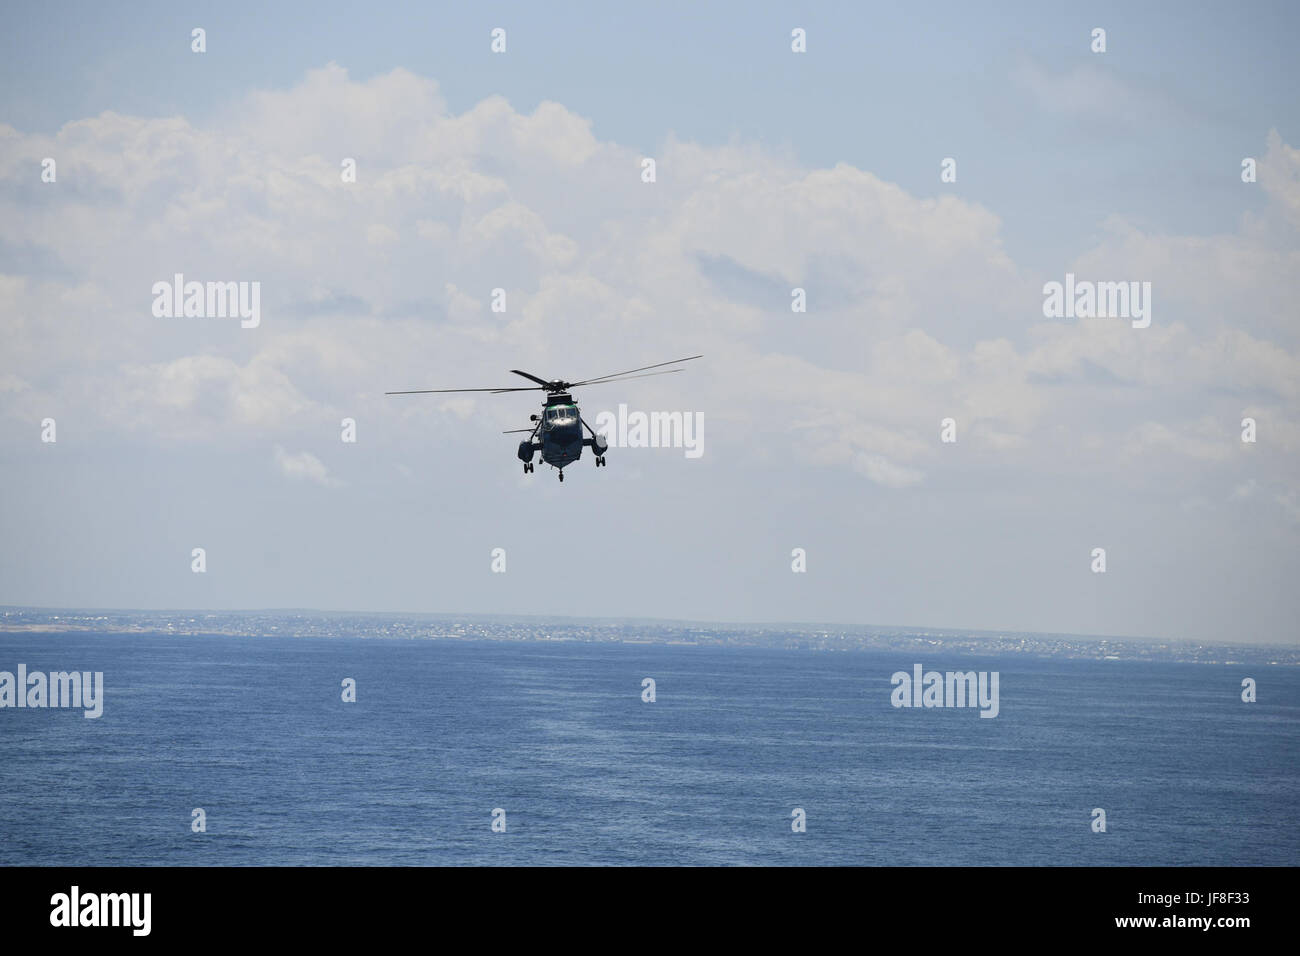 A Galicia Sea King helicopter belonging to the European Union (EU) Naval Force conducts airlifting manoeuvers on the Indian Ocean off the coast of Somalia on May 8, 2017. The EU Naval Force is engaged in counter-piracy operations in the Indian Ocean. AMISOM photo / Omar Abdisalan Stock Photo